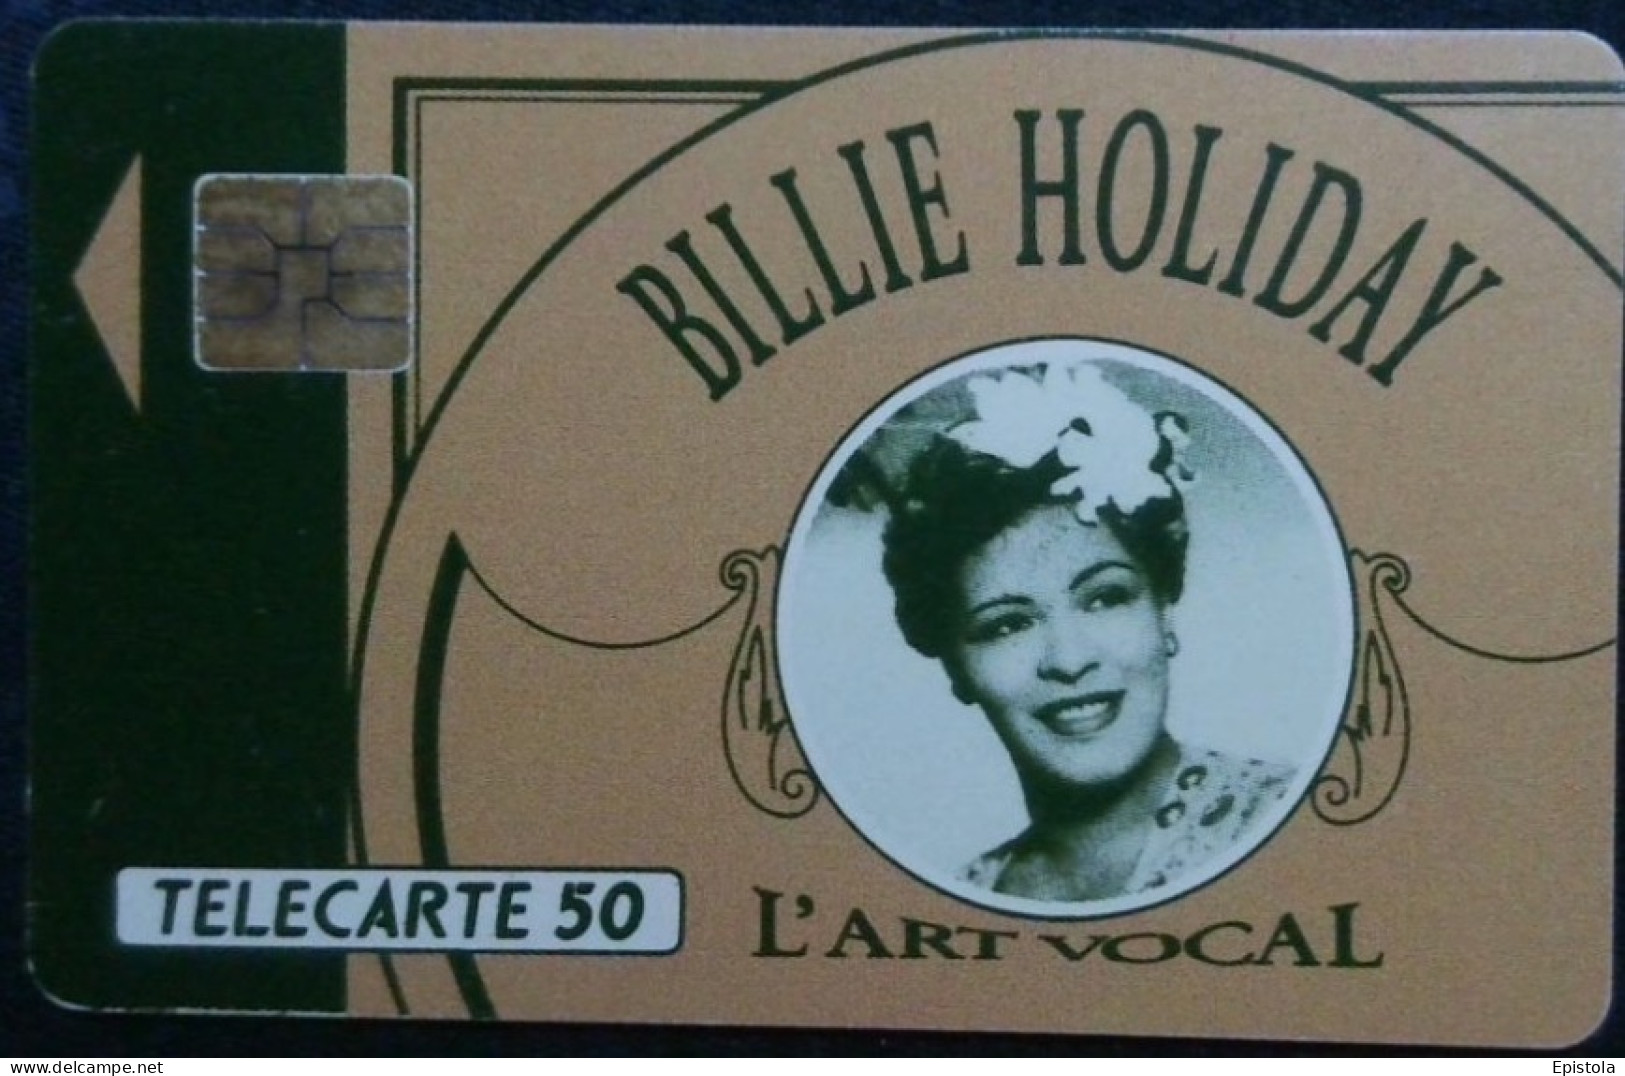 ► France:  BILLIE HOLIDAY  (1915-1959)   Collection  JAZZ  ART VOCAL - Musique